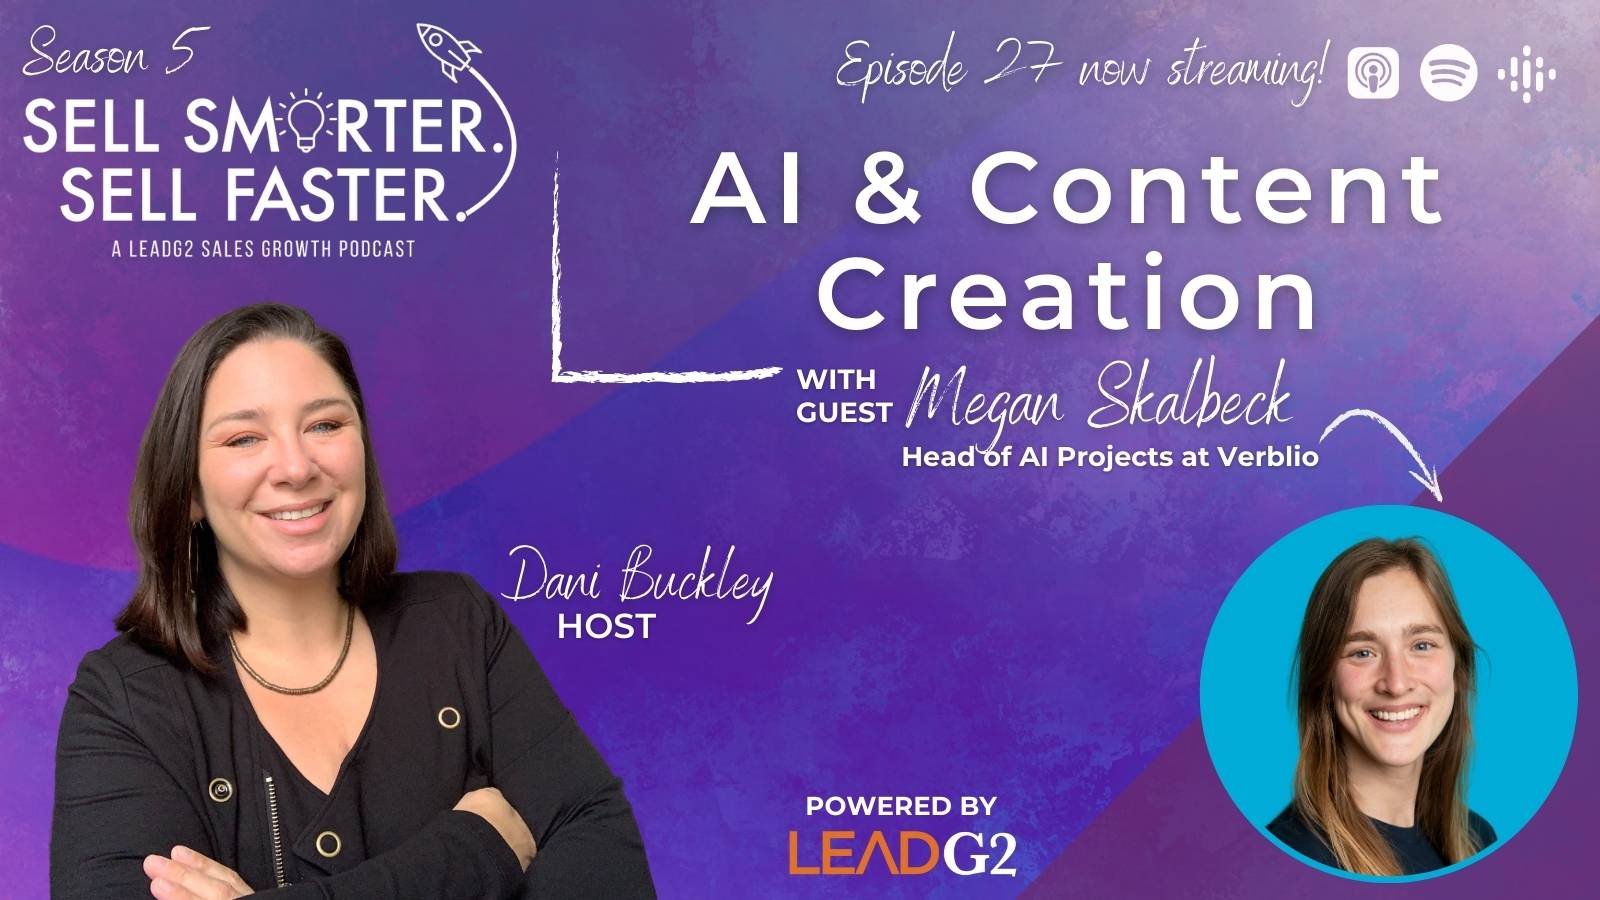 Sell Smarter Sell Faster Podcast - Ep. 27 - AI & Content Creation with Megan Skalbeck of Verblio